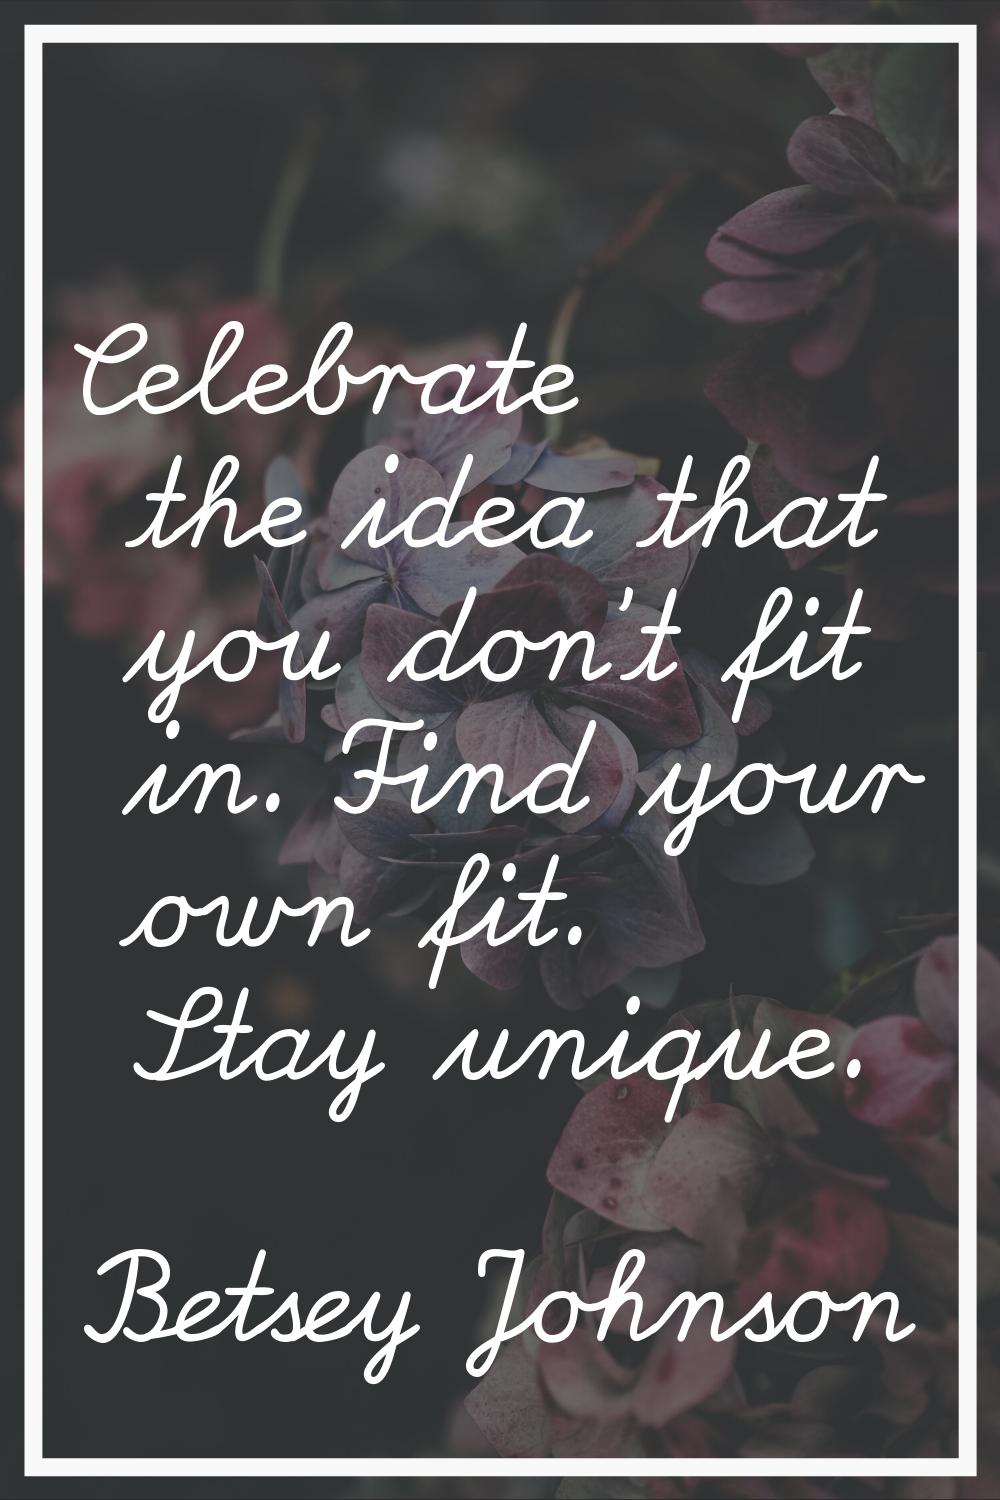 Celebrate the idea that you don't fit in. Find your own fit. Stay unique.